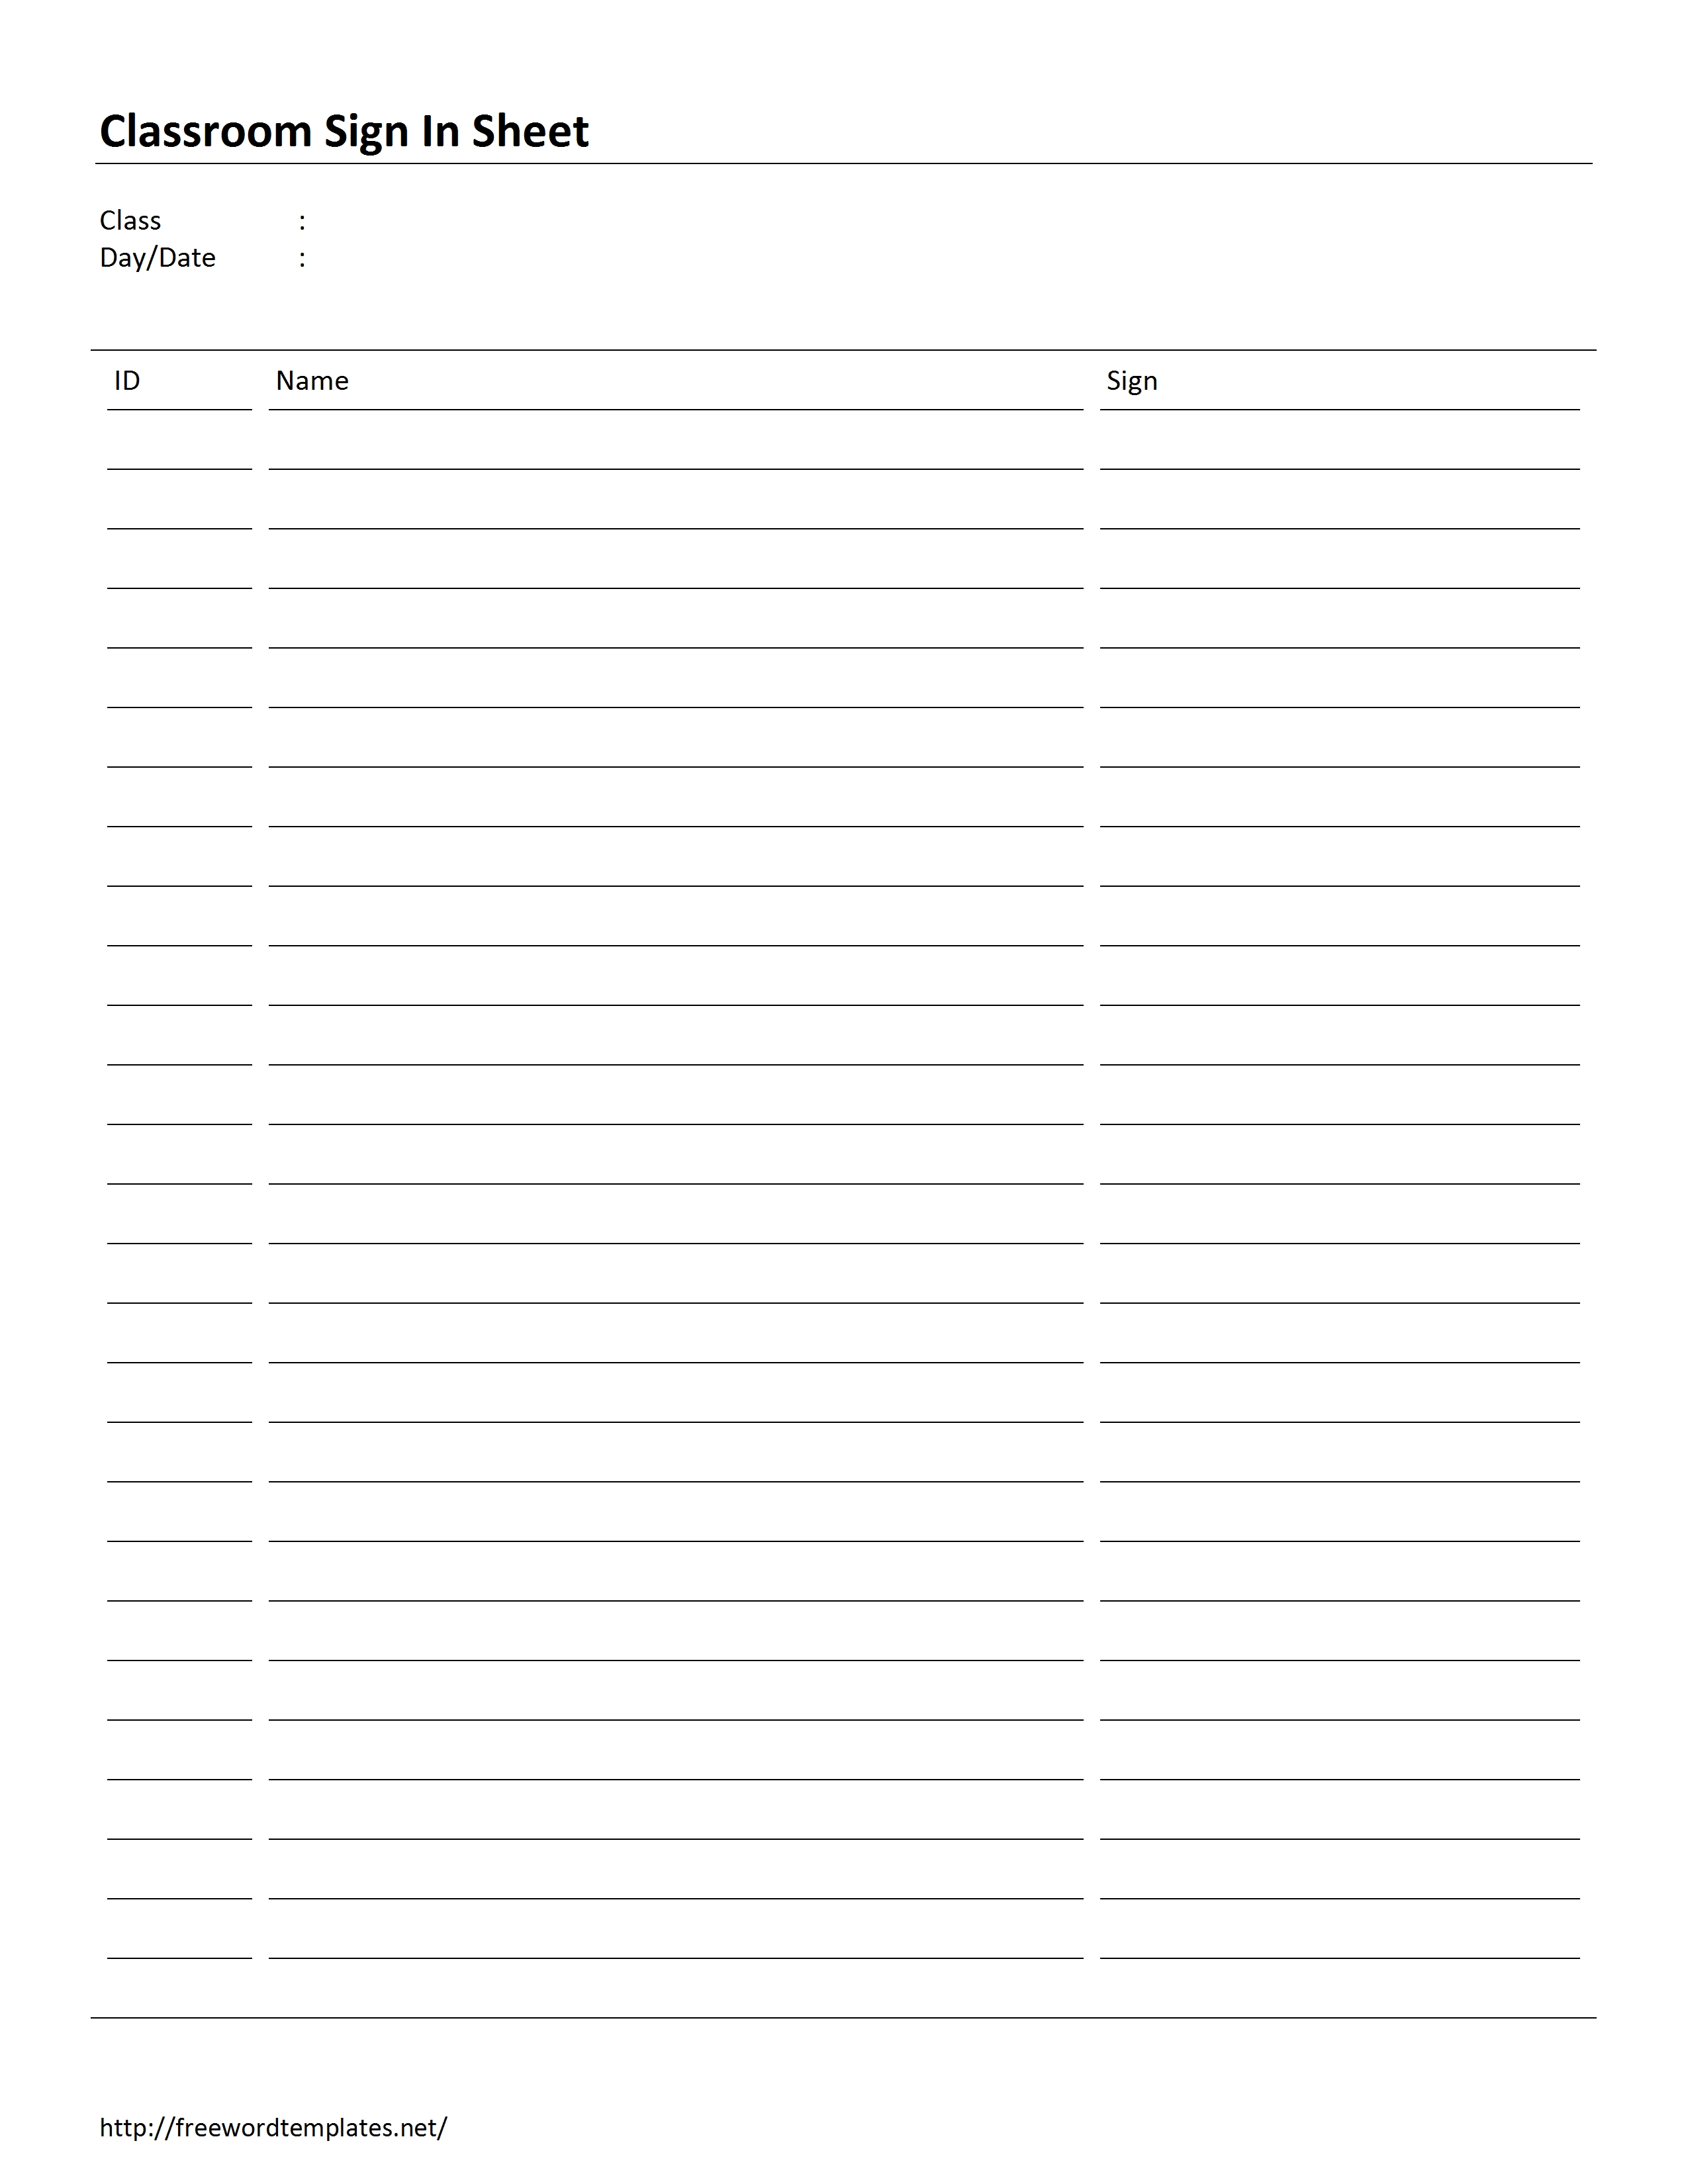 sign-in-sheets-sign-in-sheet-template-sign-up-sheets-sign-in-sheet-riset